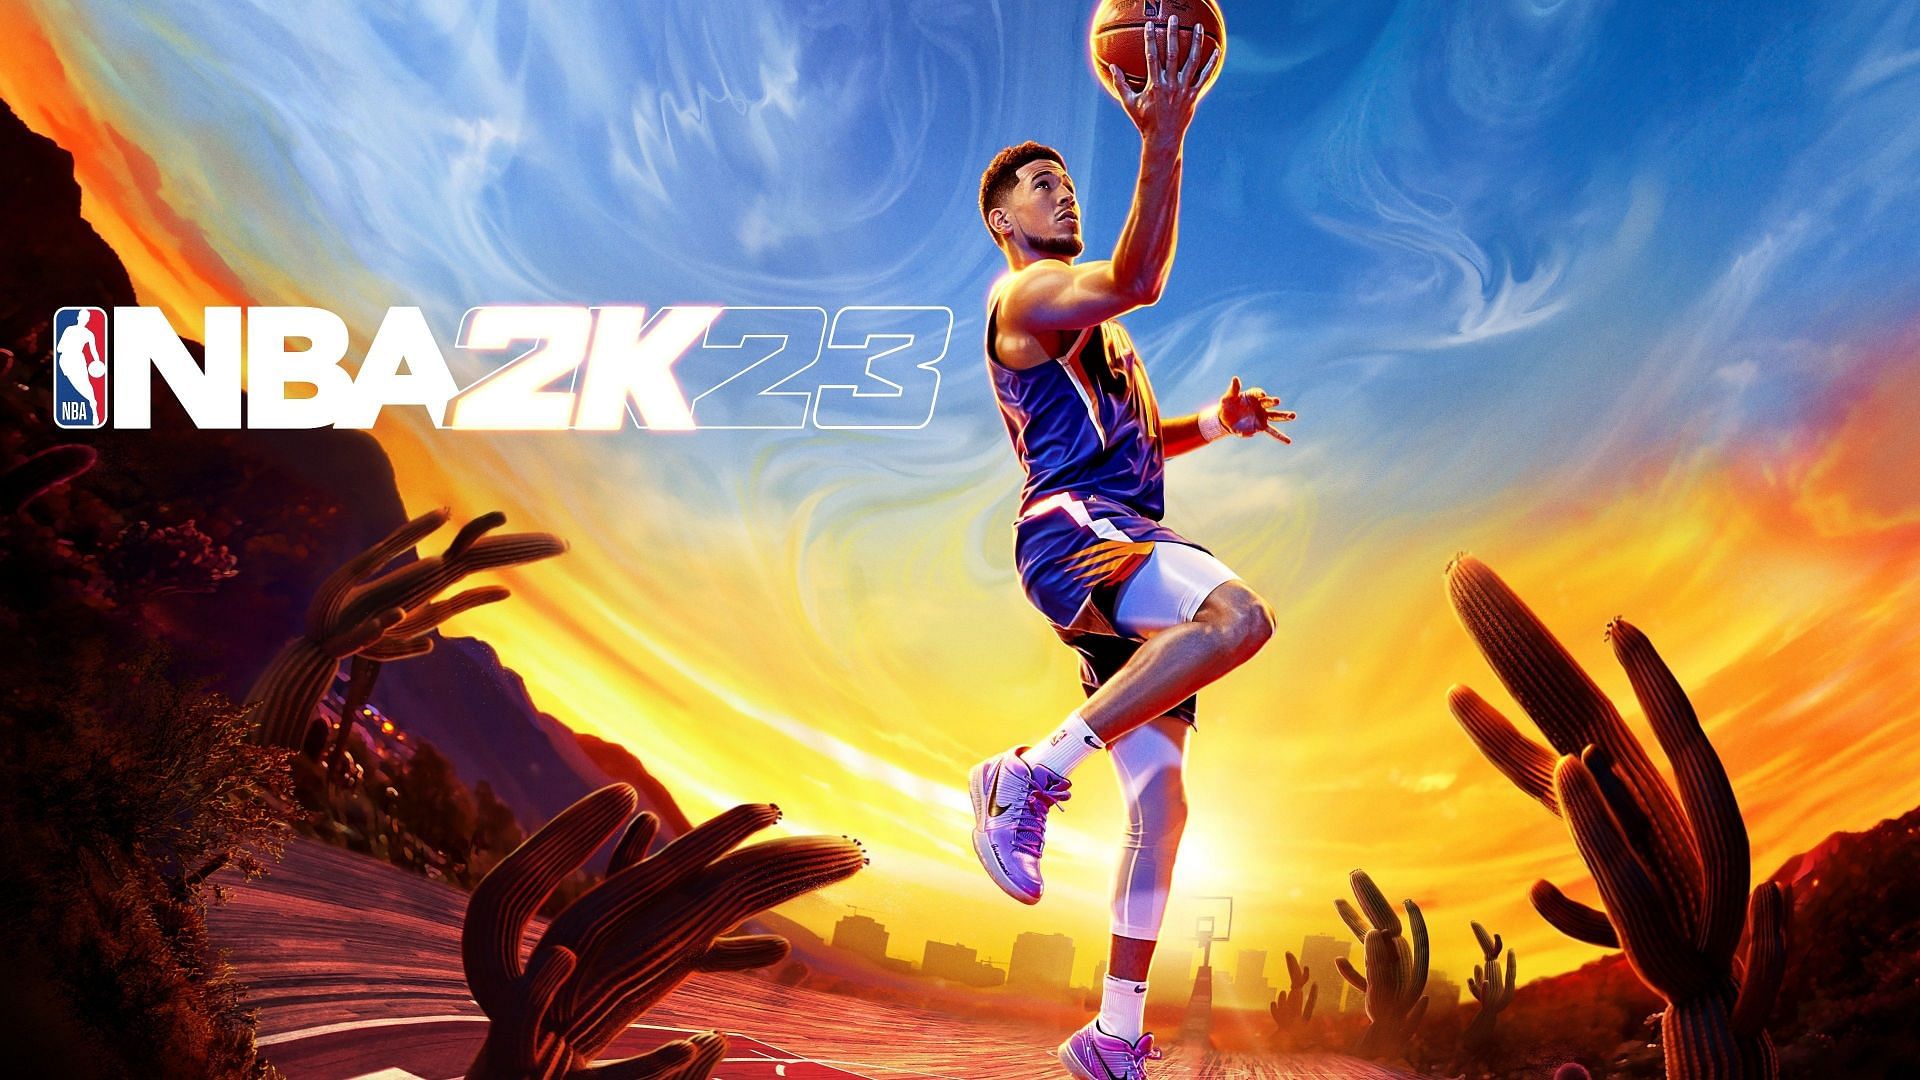 NBA 2K23 will be released on September 9th, although the digital versions will be out a day earlier!